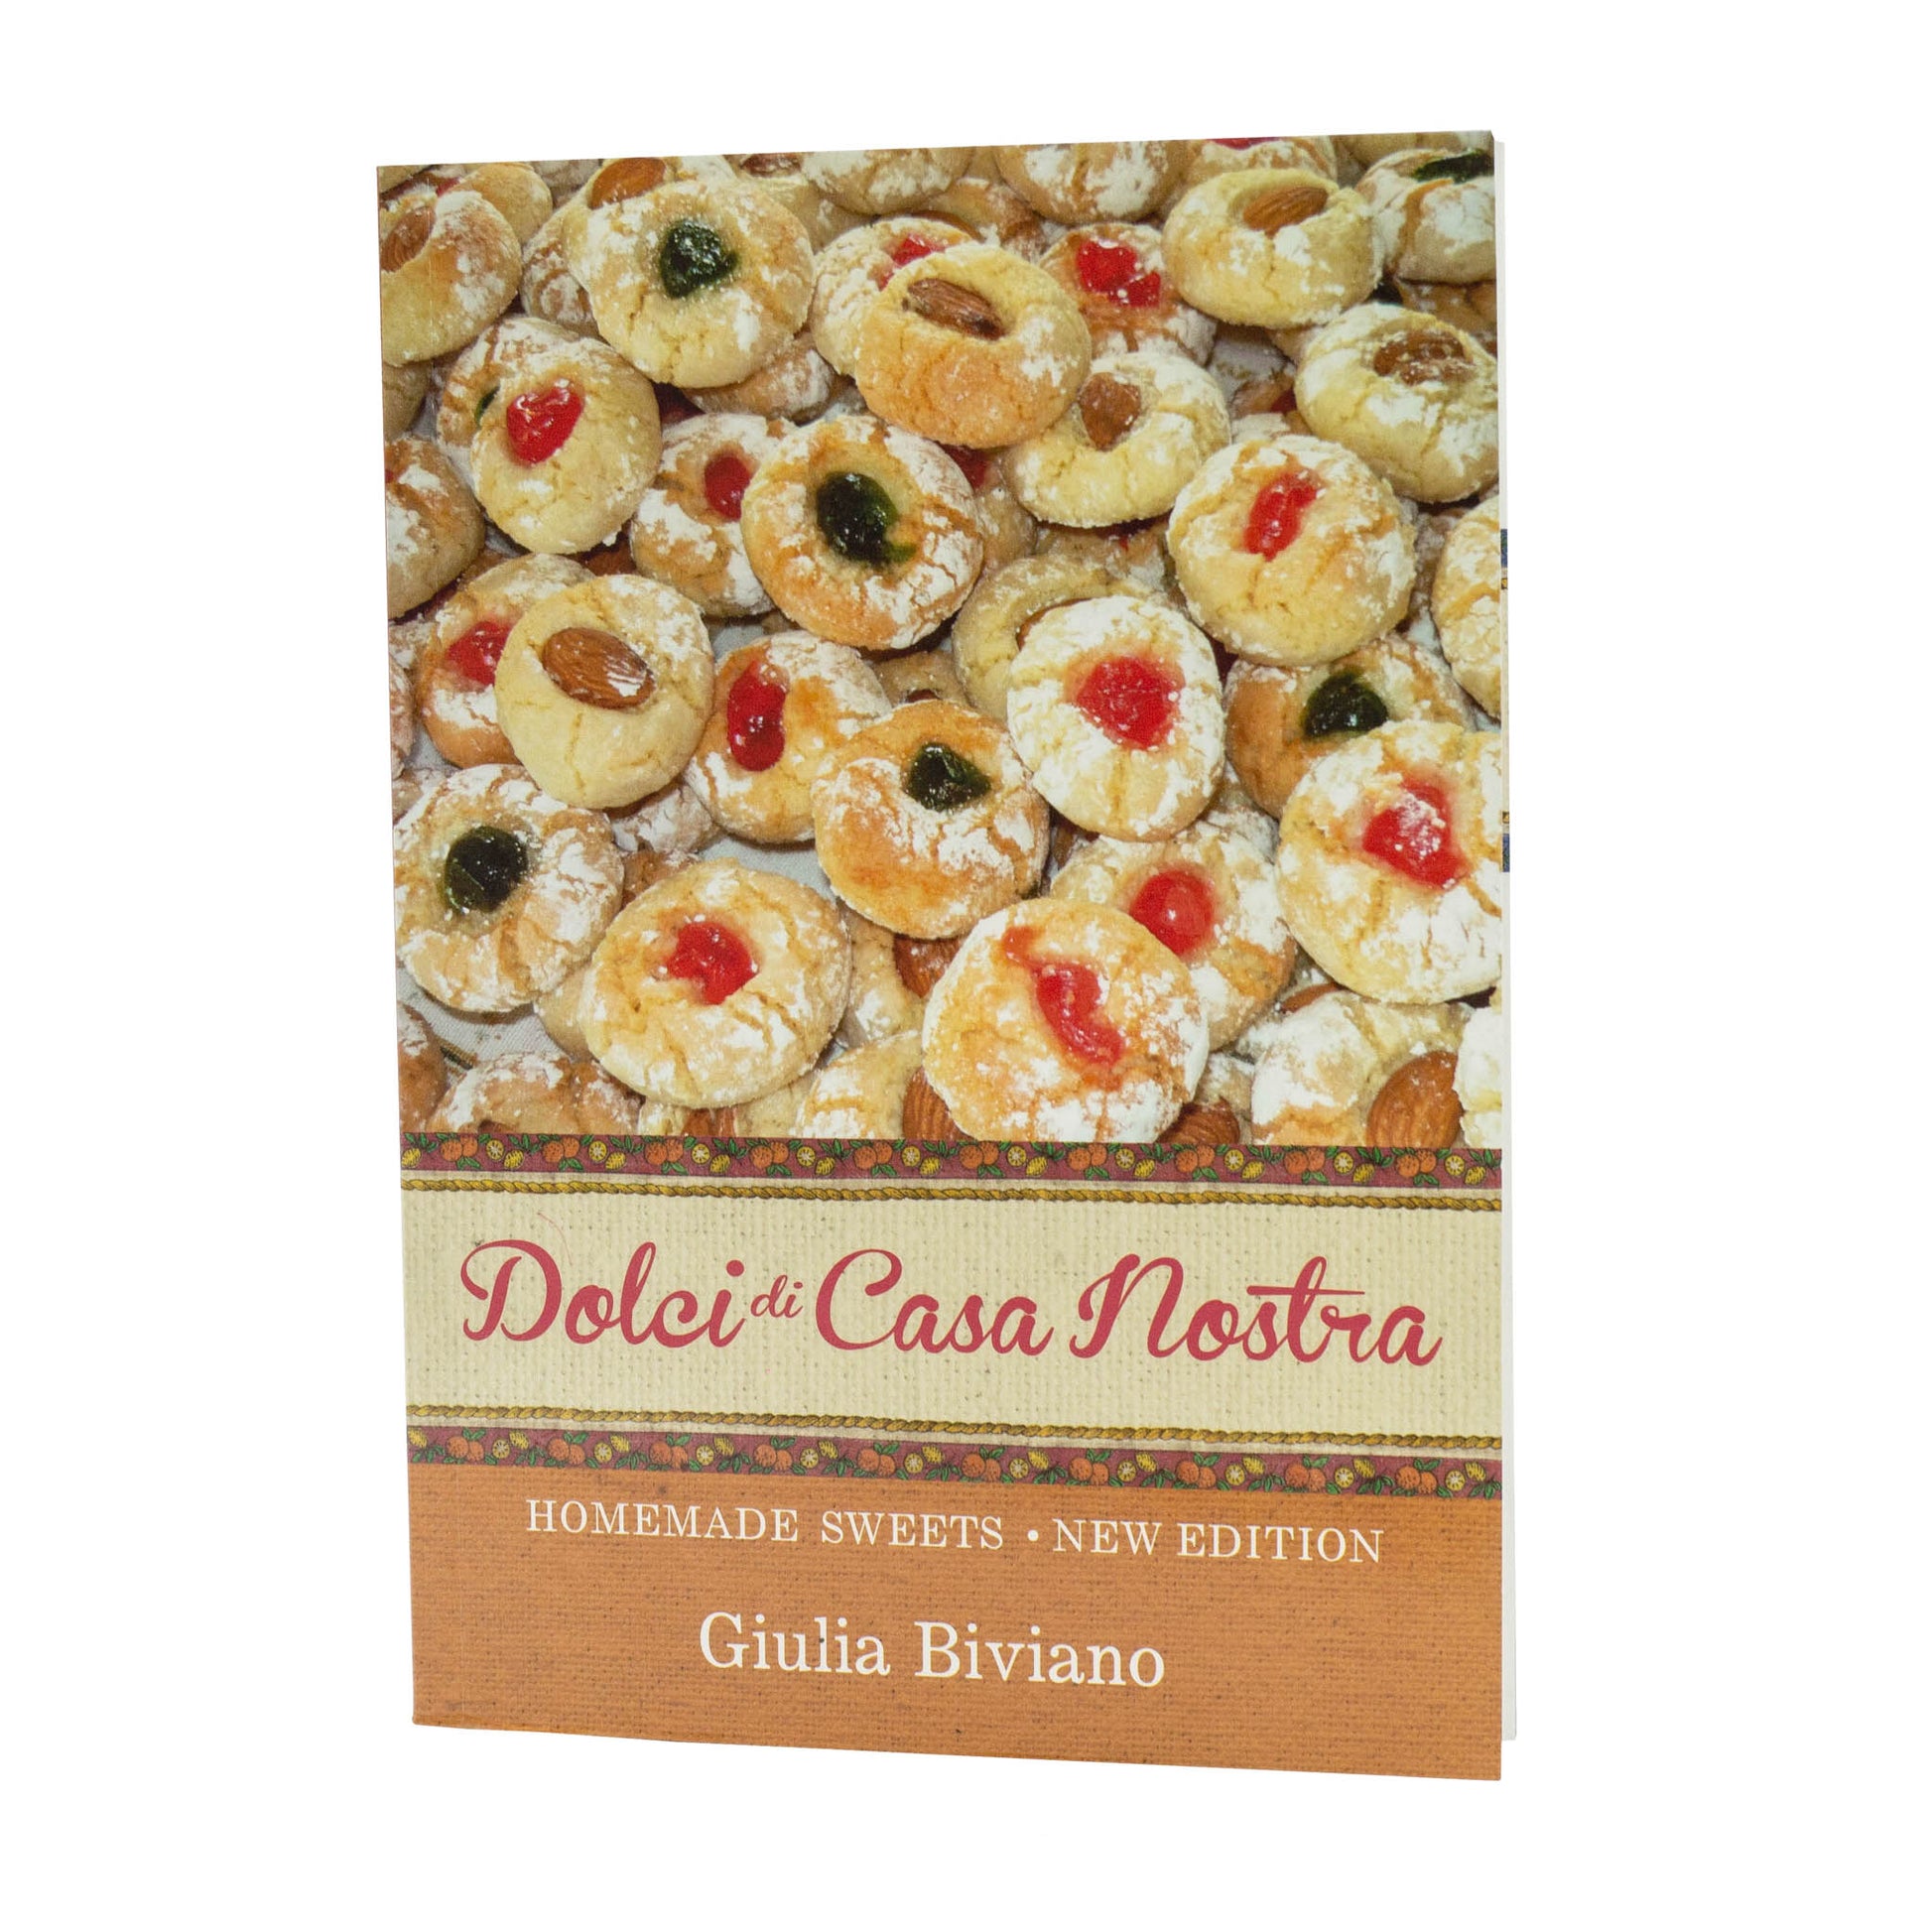 Book with over 70 homemade sweet recipes written by Giulia Biviano